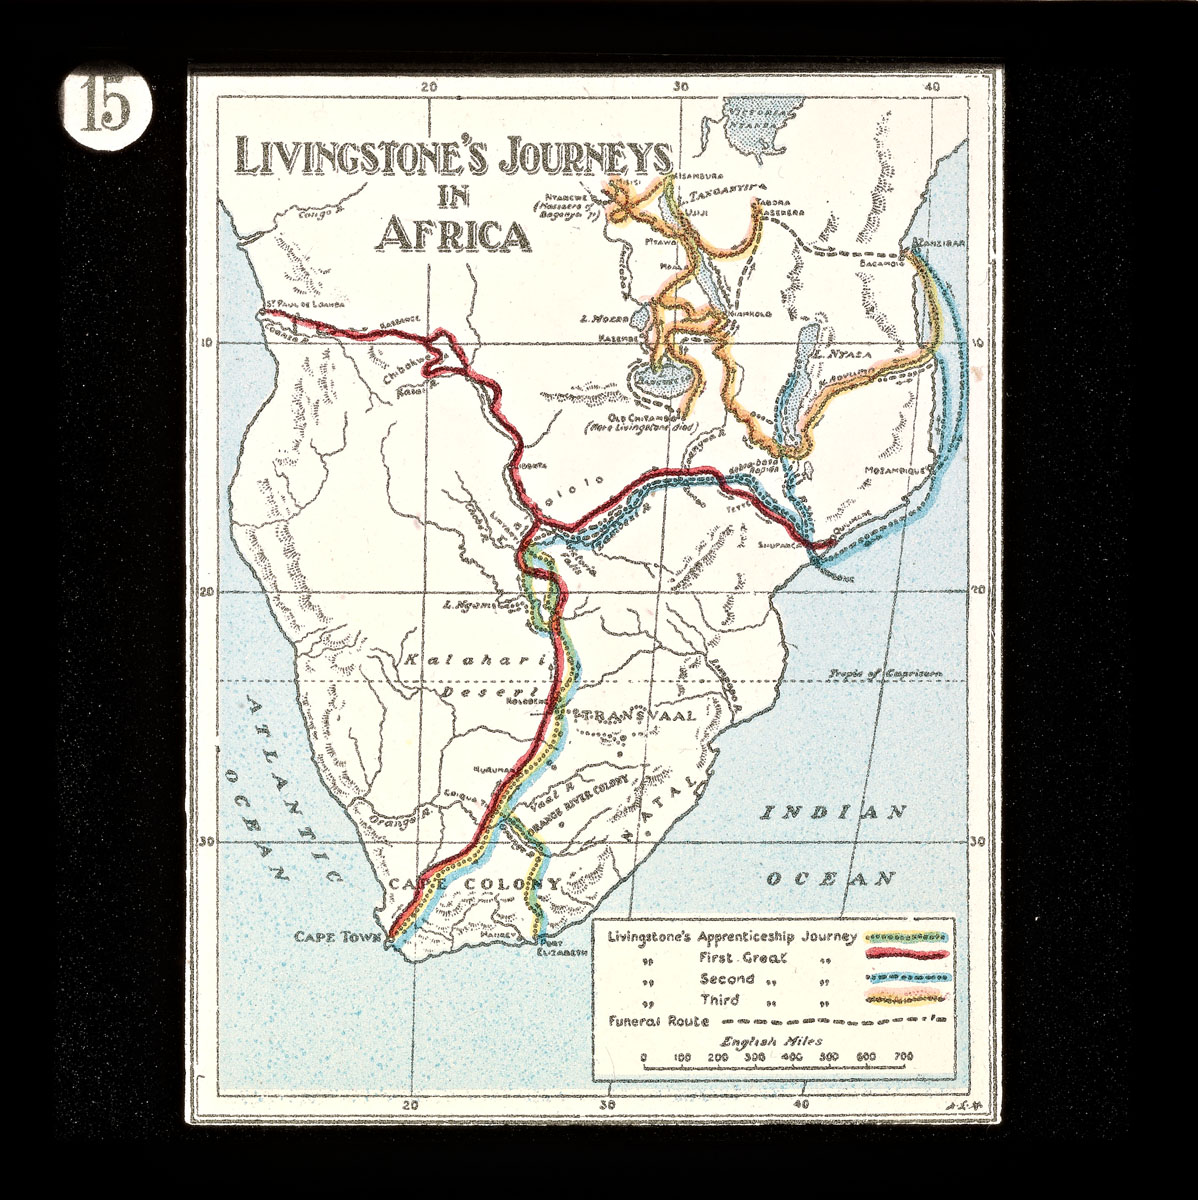 'Map Showing Travels.' Image from Lantern Slides of the Life, Adventures, and Work of David Livingstone, Date Unknown: [15]. Image courtesy of the Smithsonian Libraries, Washington, D.C.